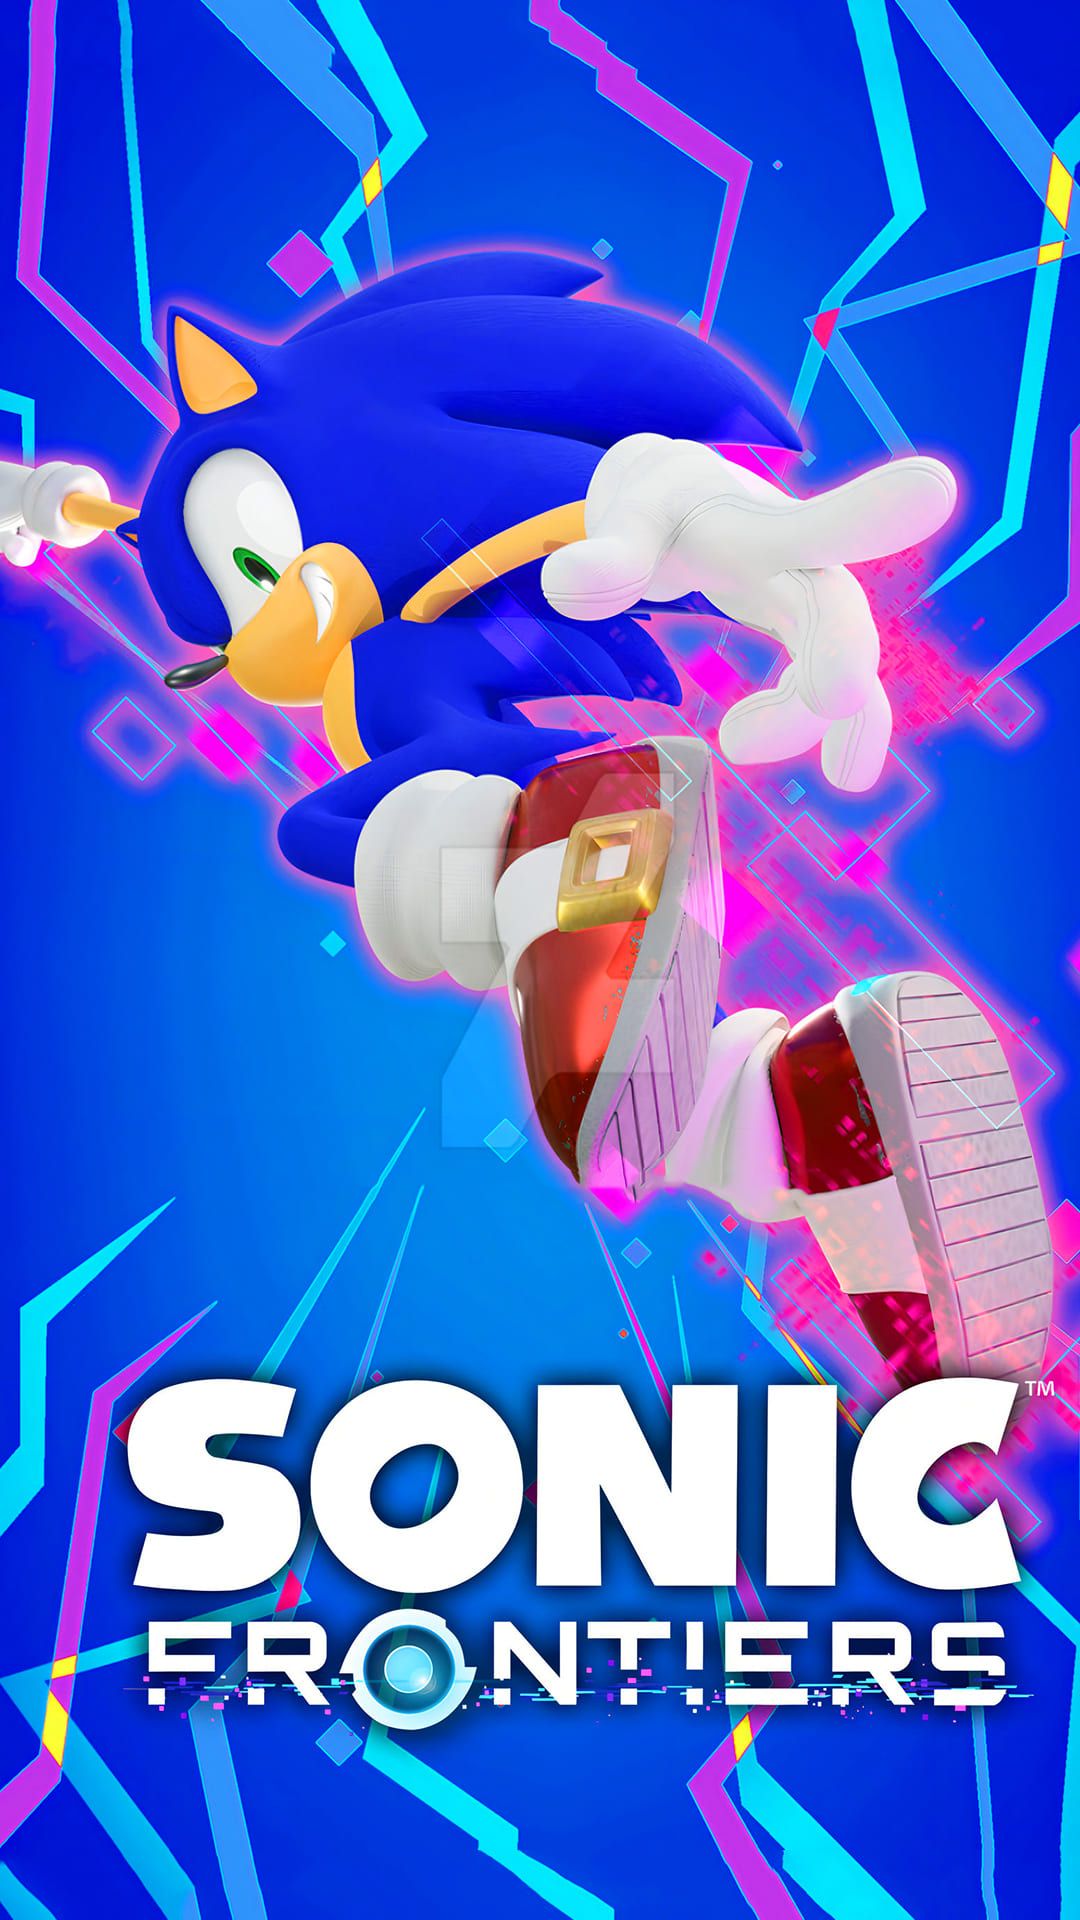 Sonic Frontiers iPhone Wallpaper with high-resolution 1080x1920 pixel. You can use this wallpaper for your iPhone 5, 6, 7, 8, X, XS, XR backgrounds, Mobile Screensaver, or iPad Lock Screen - Sonic